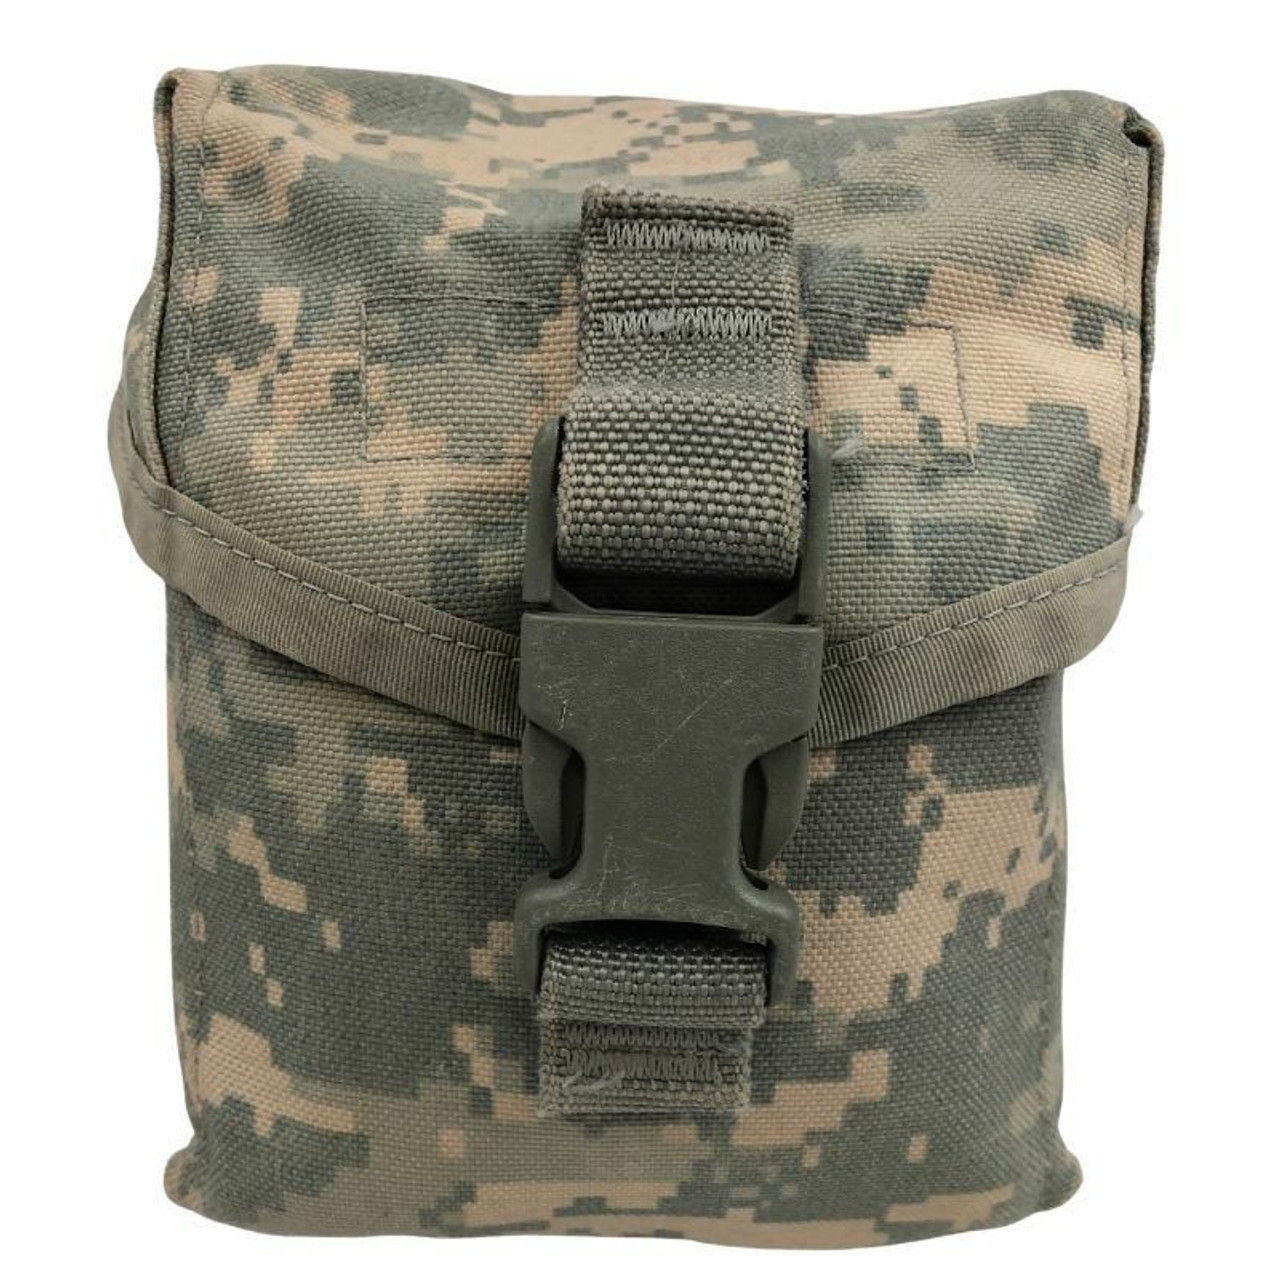 ACU MOLLE (IFAK) First Aid Complete Medical Kit